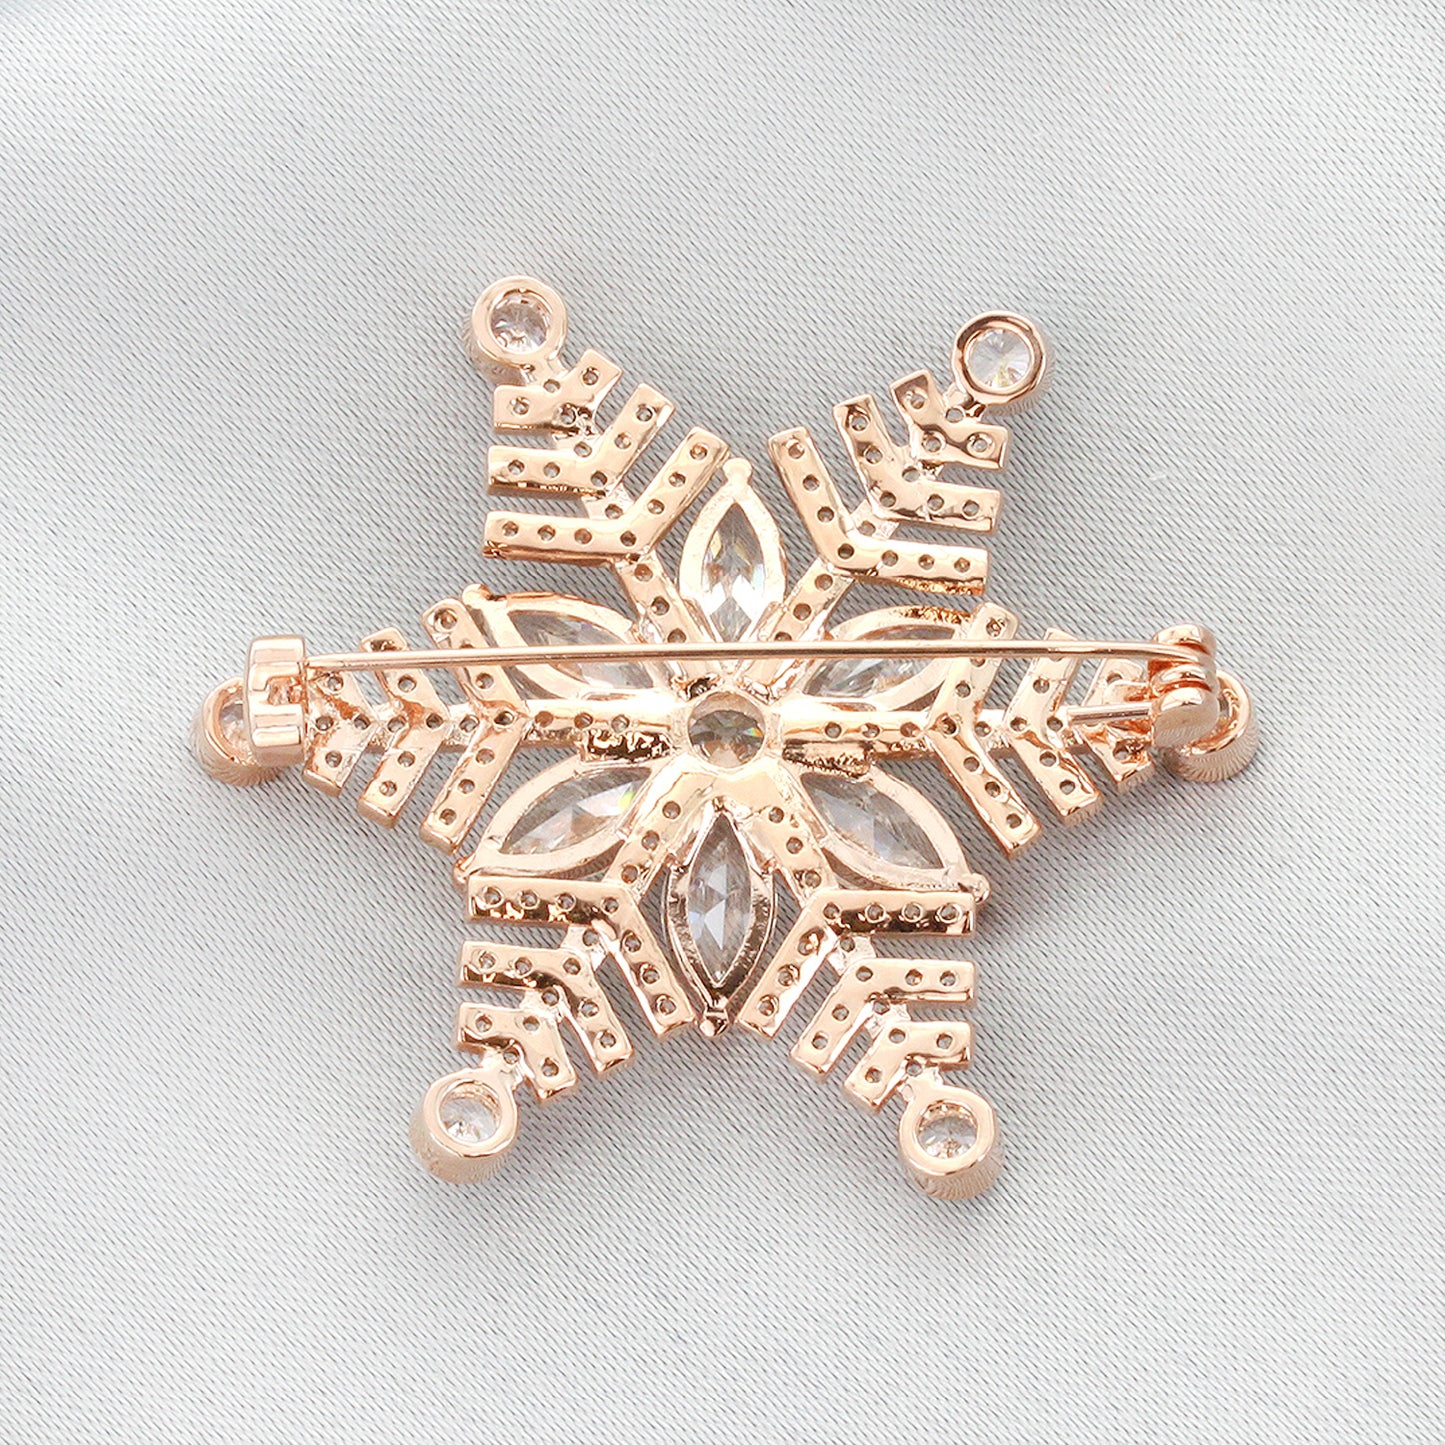 Melody Snowflake Cubic Zirconia Brooch - Rose Gold